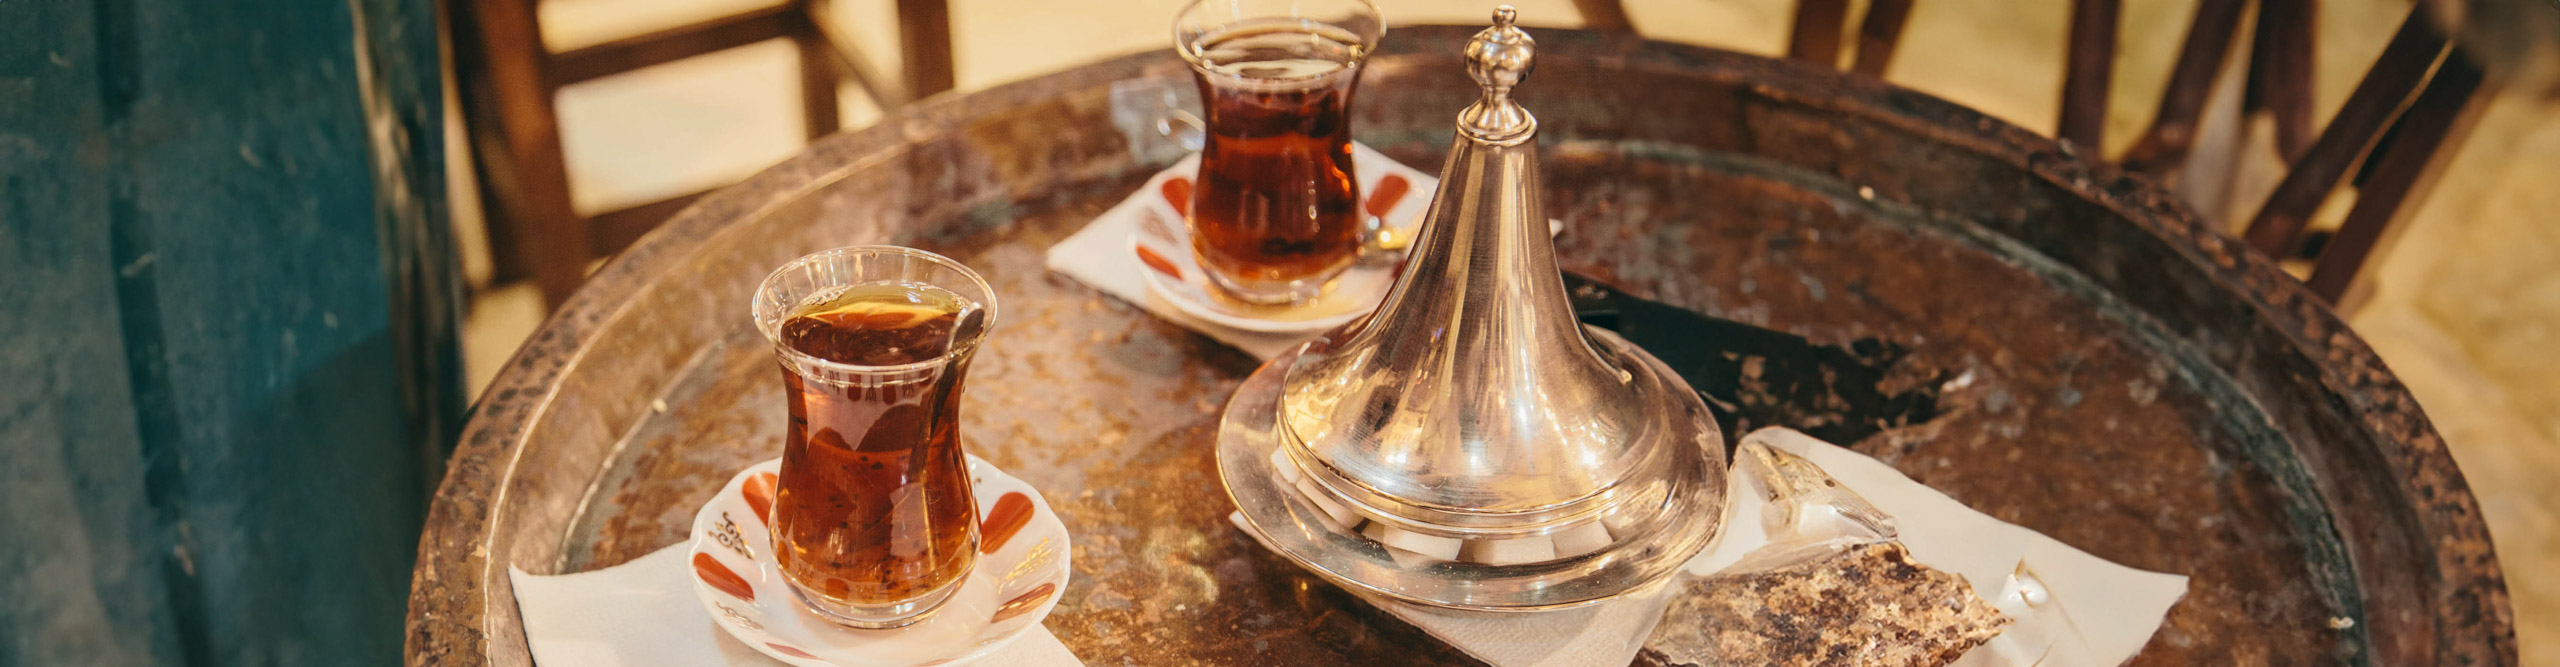 Turkish tea on a silver platter with a teapot 